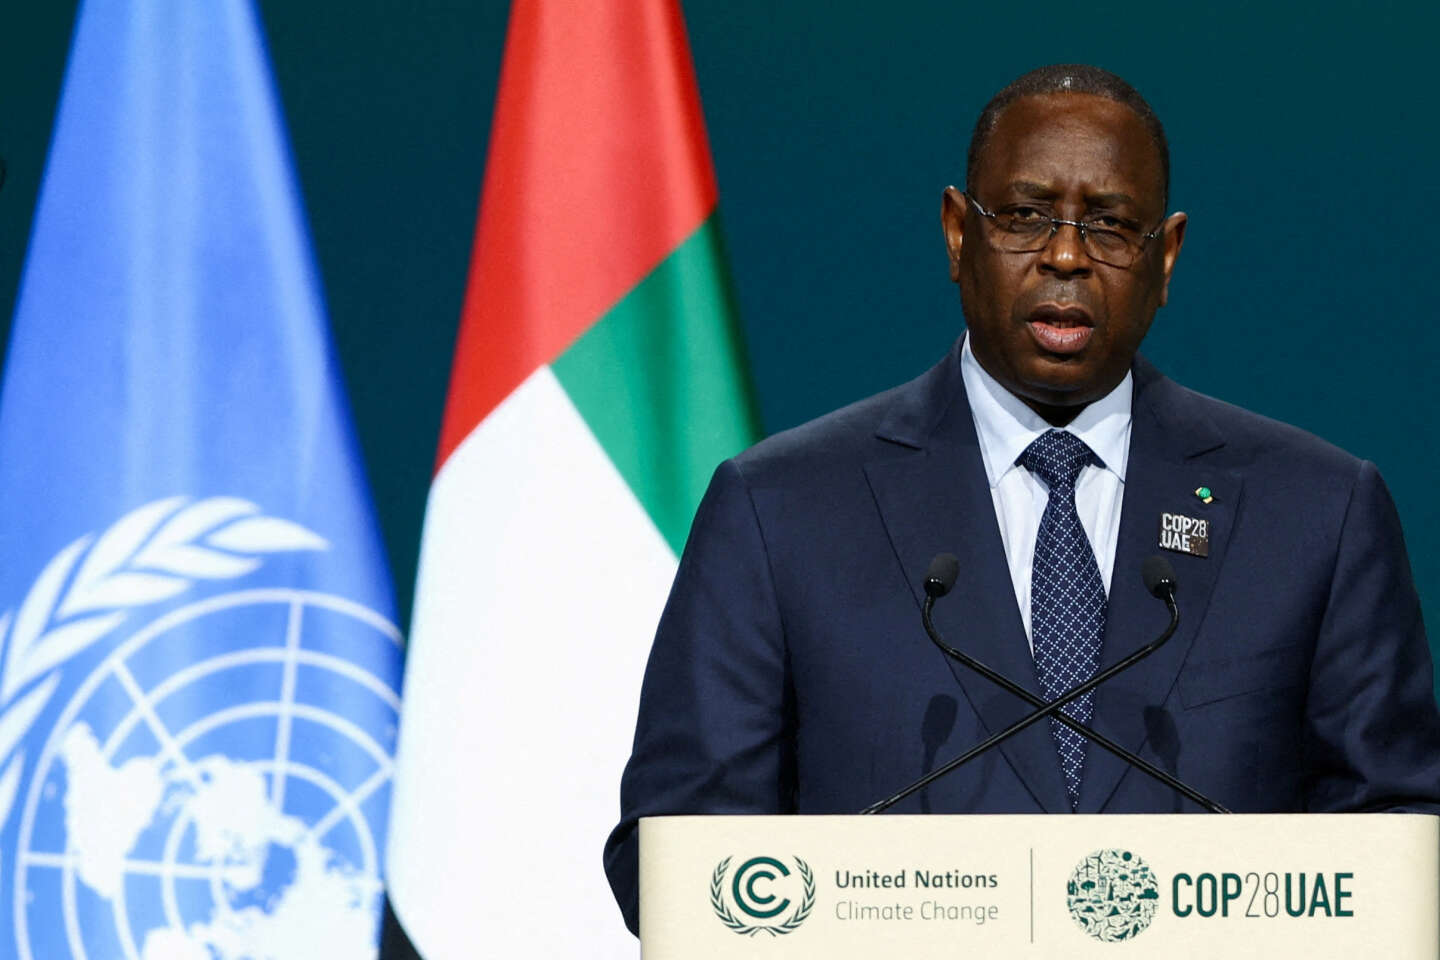 In Senegal, President Macky Sall announced the postponement of the presidential elections indefinitely